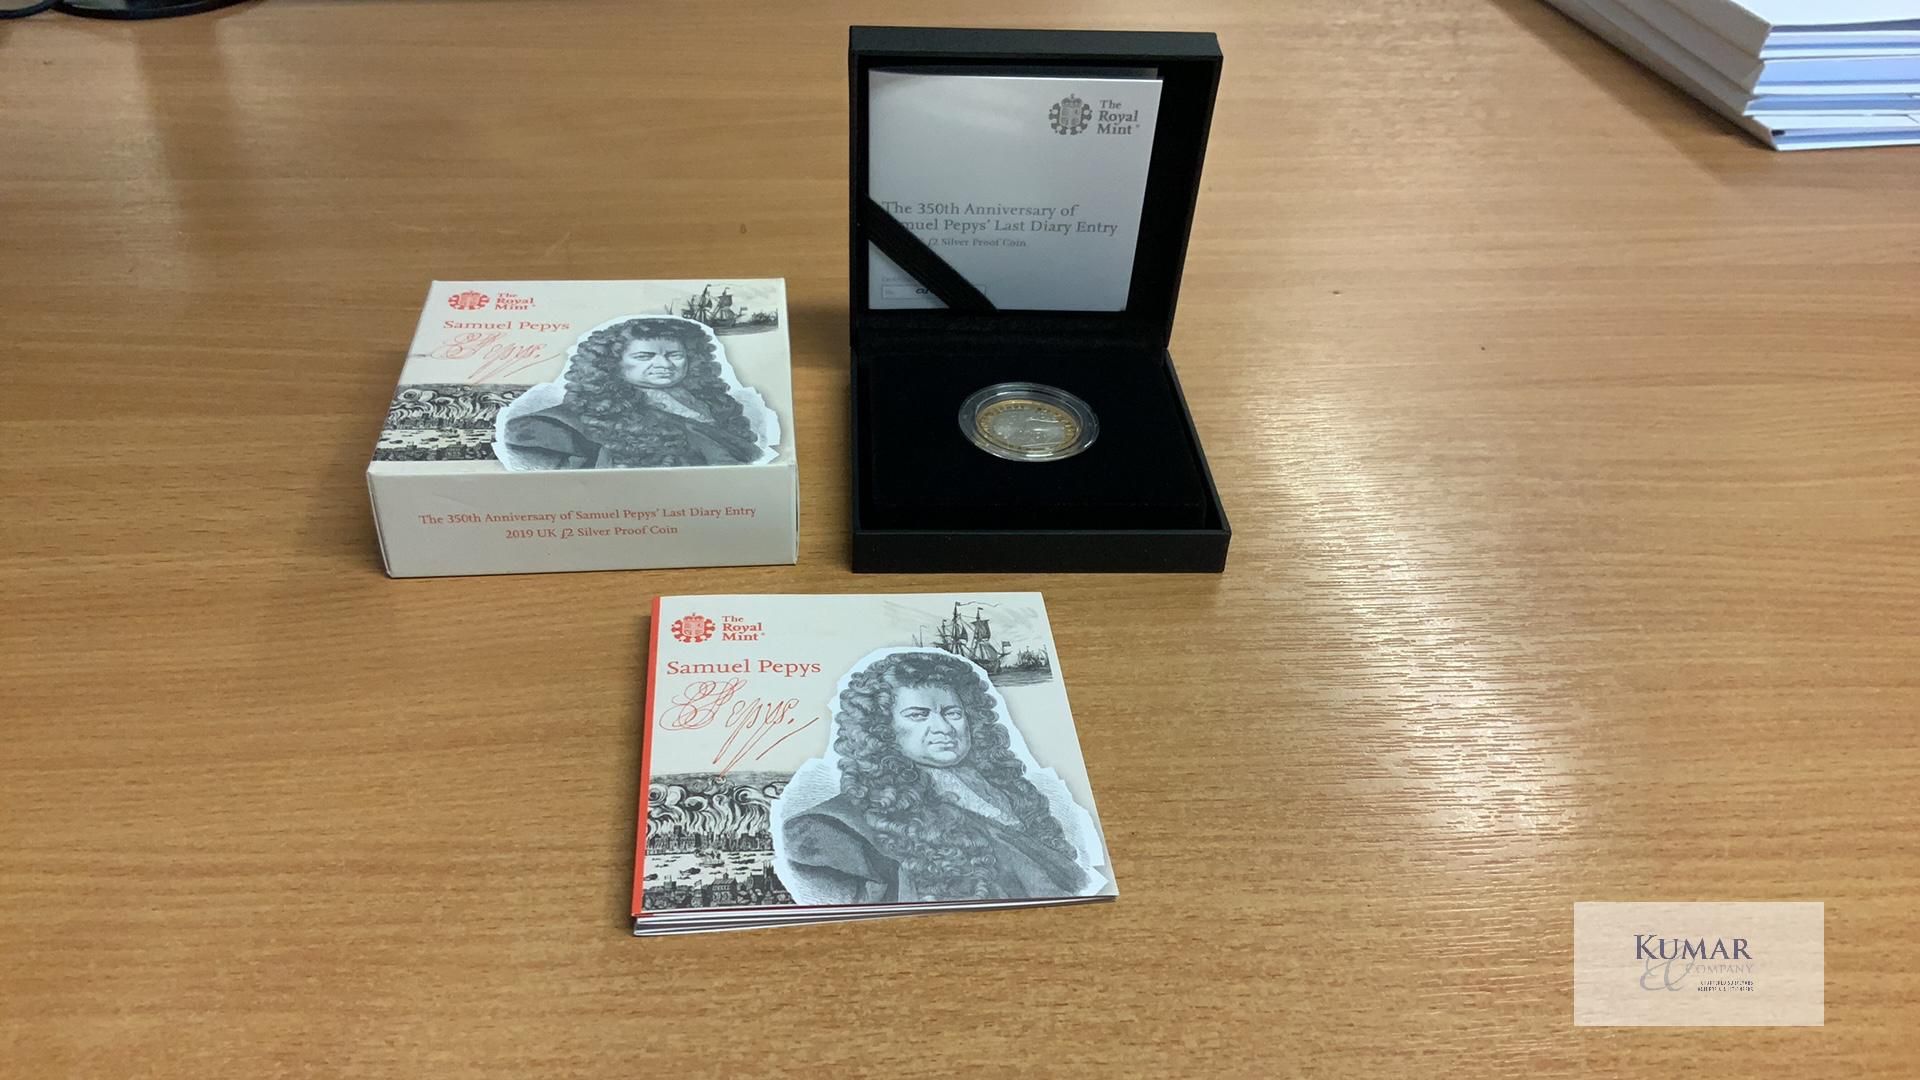 The Royal Mint Coin - The 350th Anniversary of Samuel Pepys Last Diary Entry 2019 UK £2 Silver Proof - Bild 3 aus 4